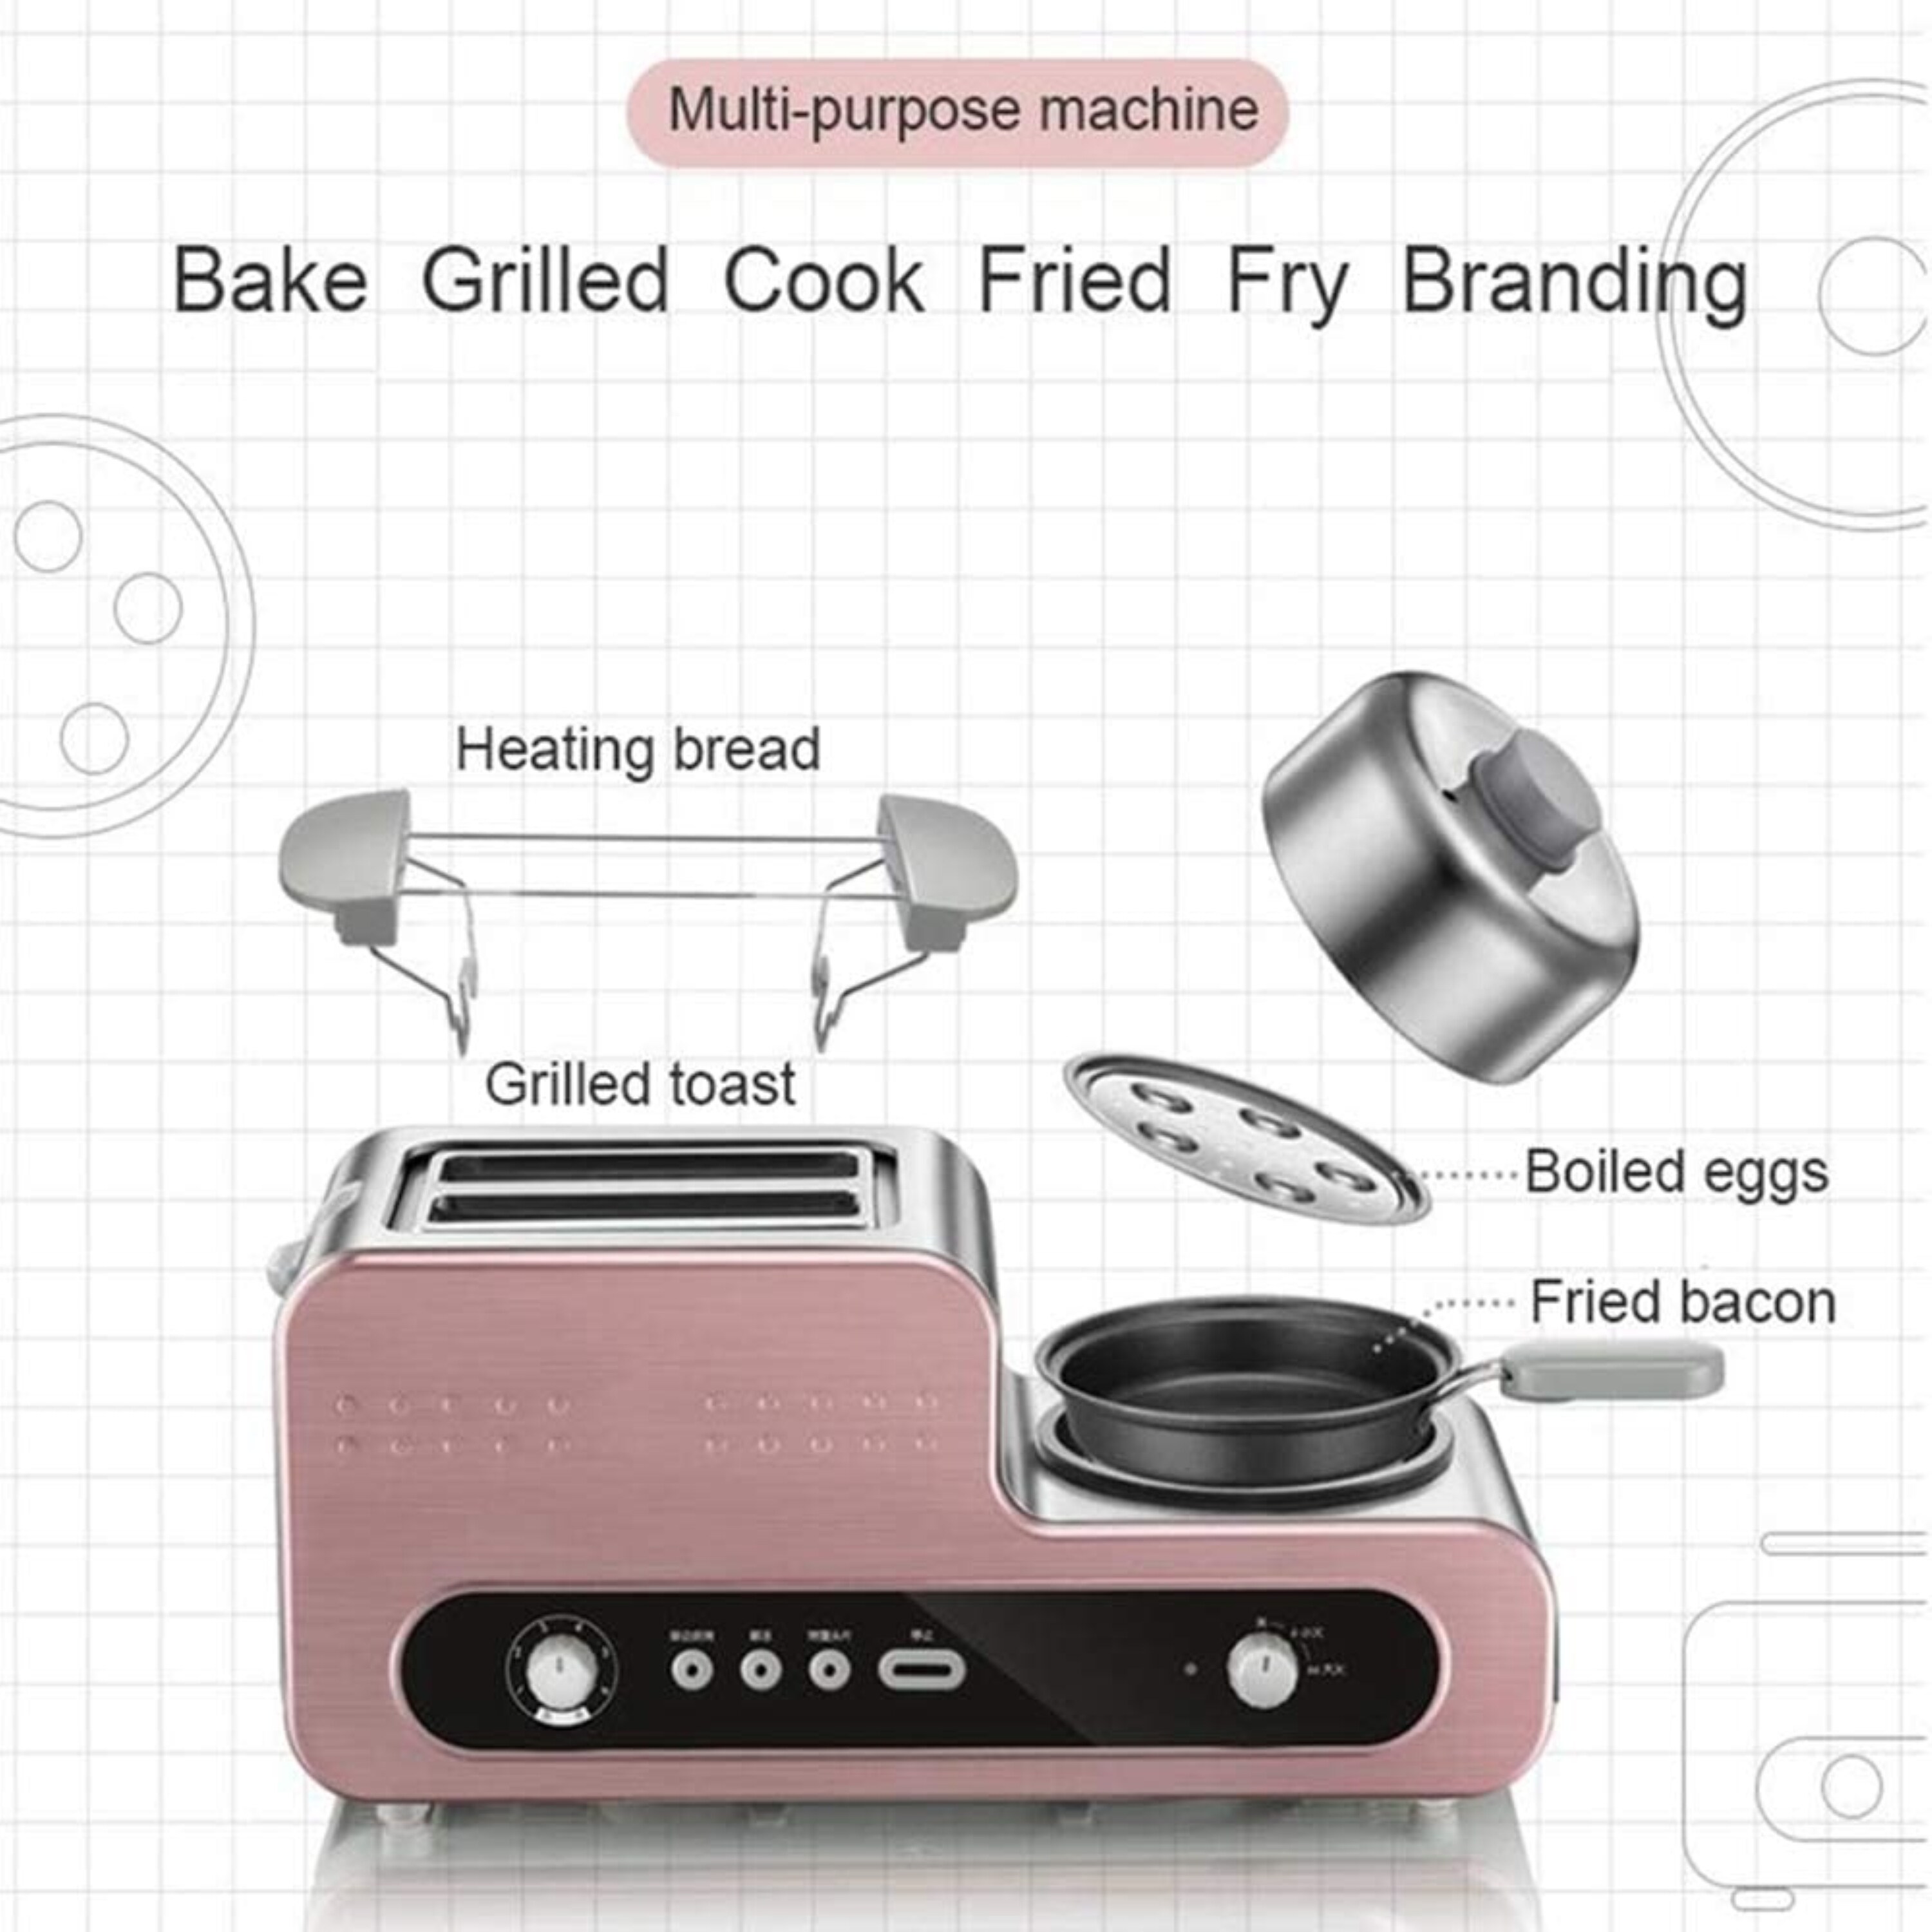 This Multipurpose Appliance Is An Oven, Frying Pan, and Boiler All in One